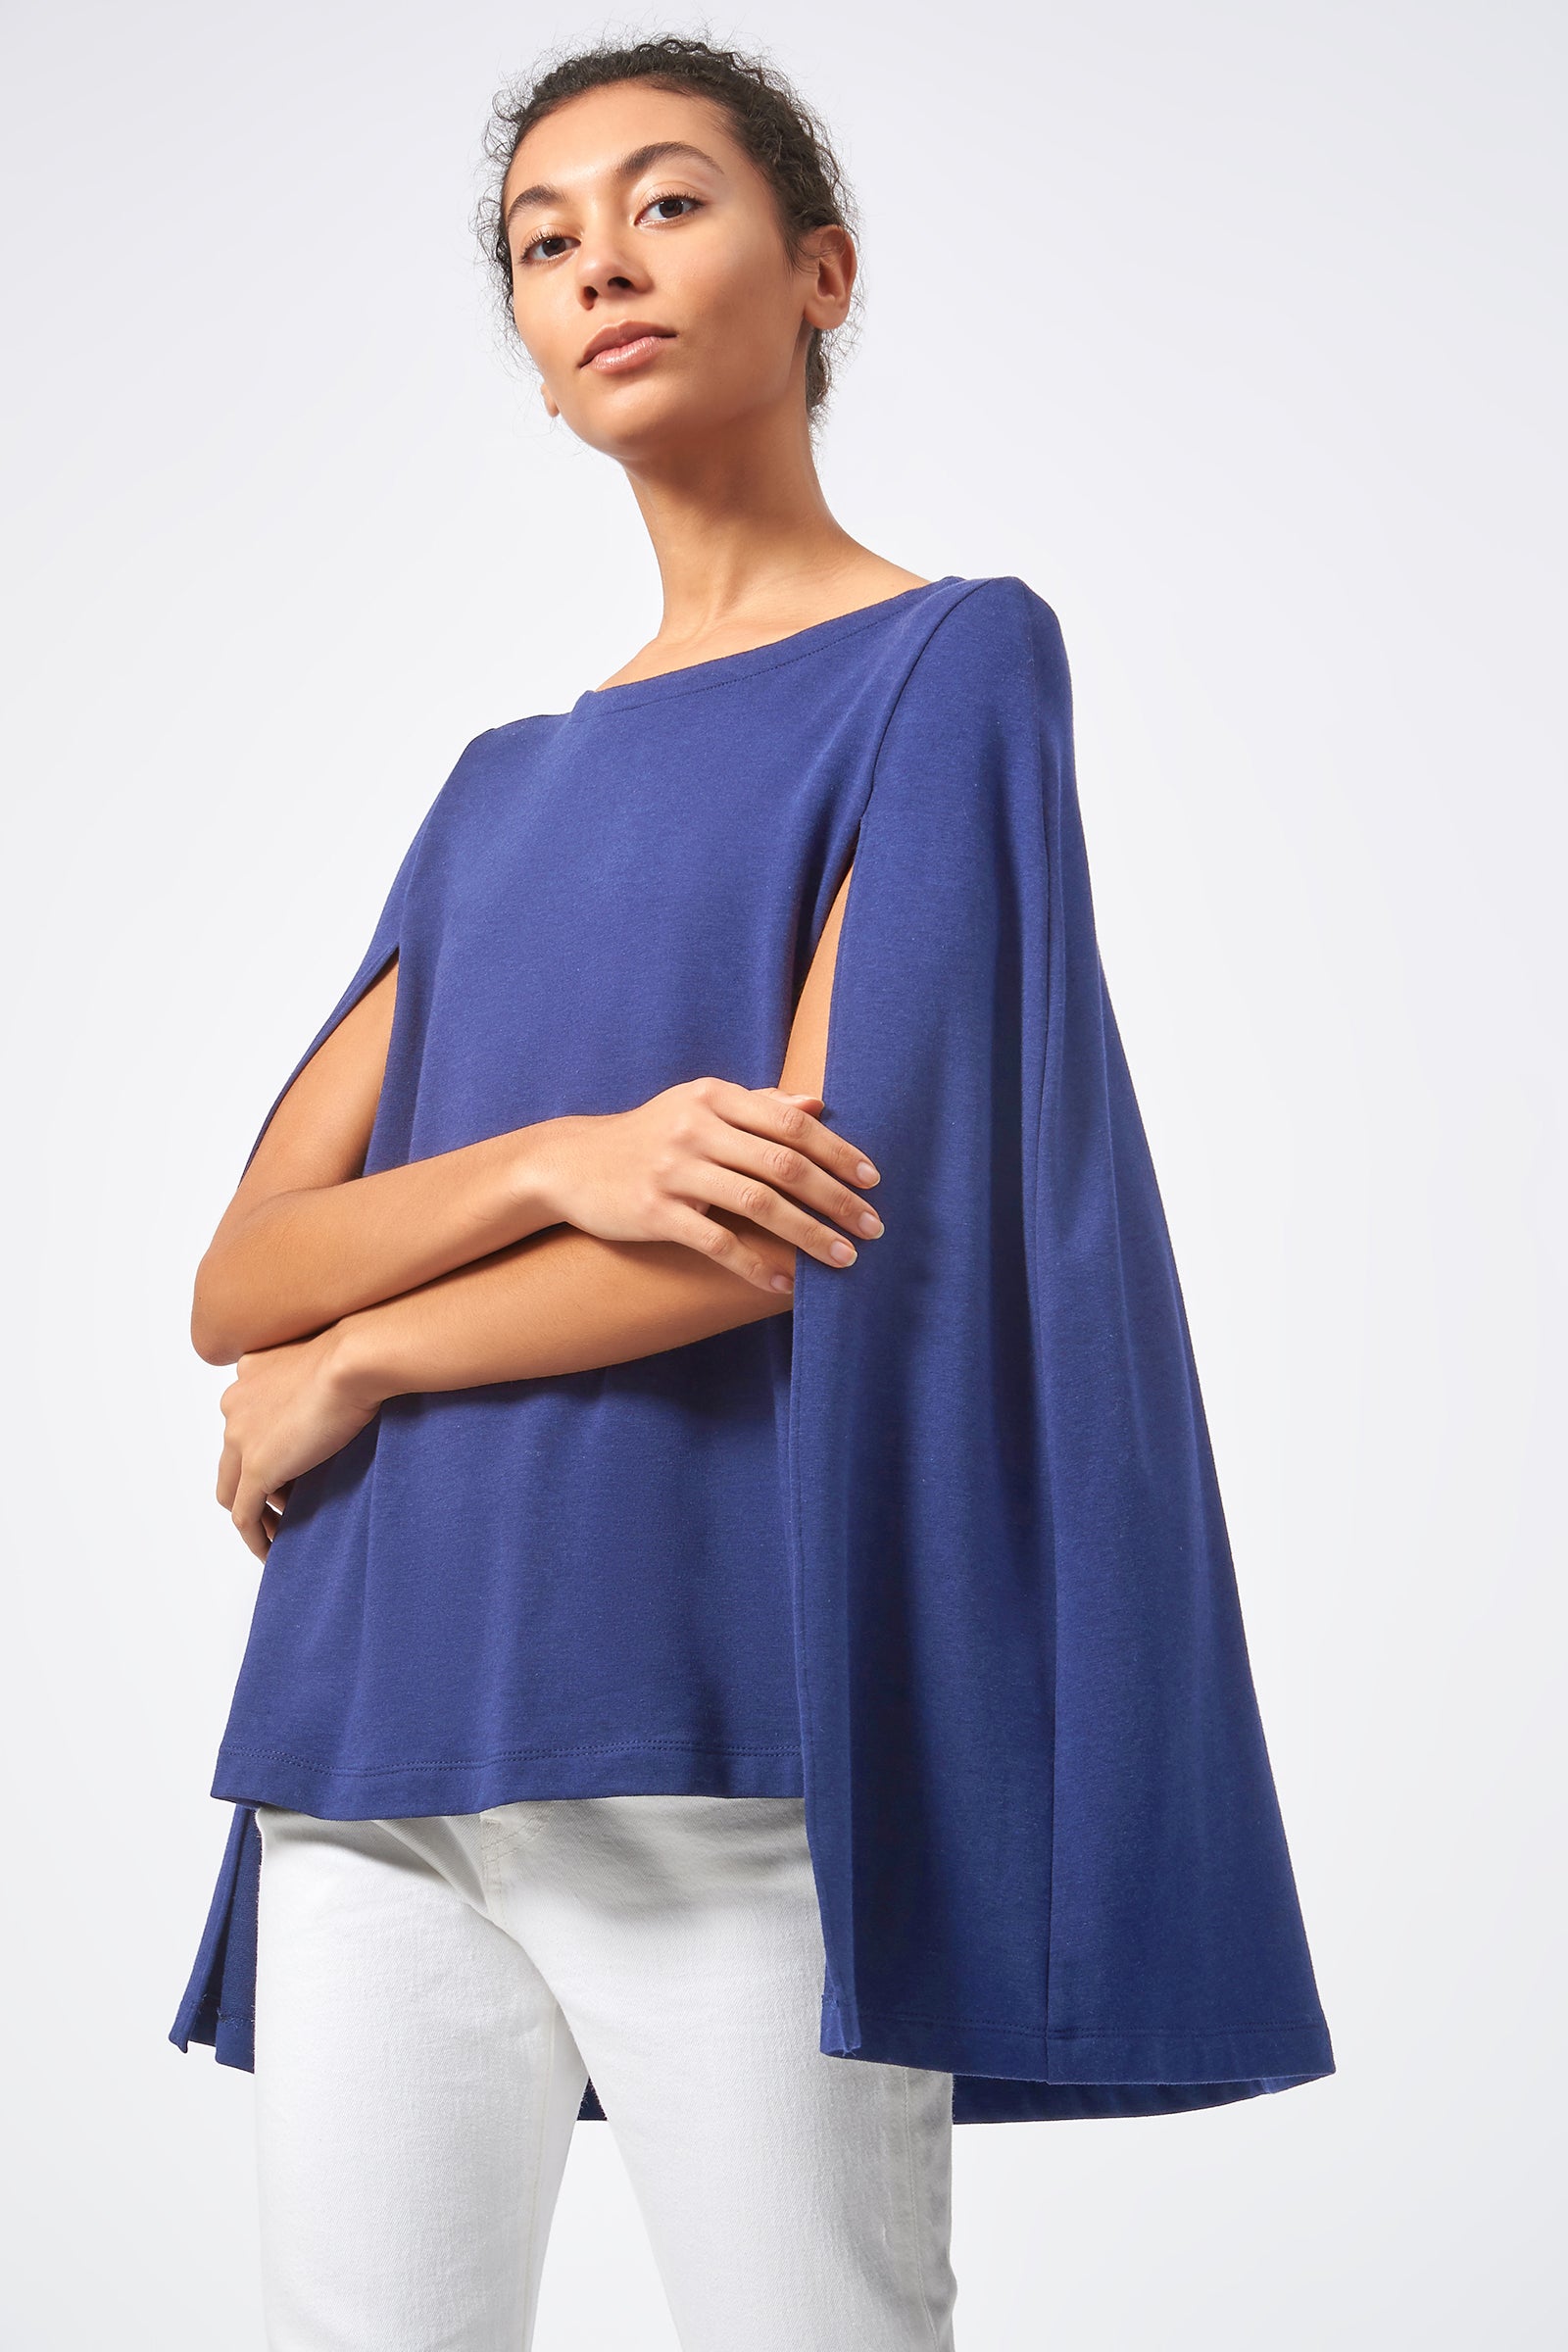 Kal Rieman Cape Sweatshirt in Bamboo Terry Blue image of the side view